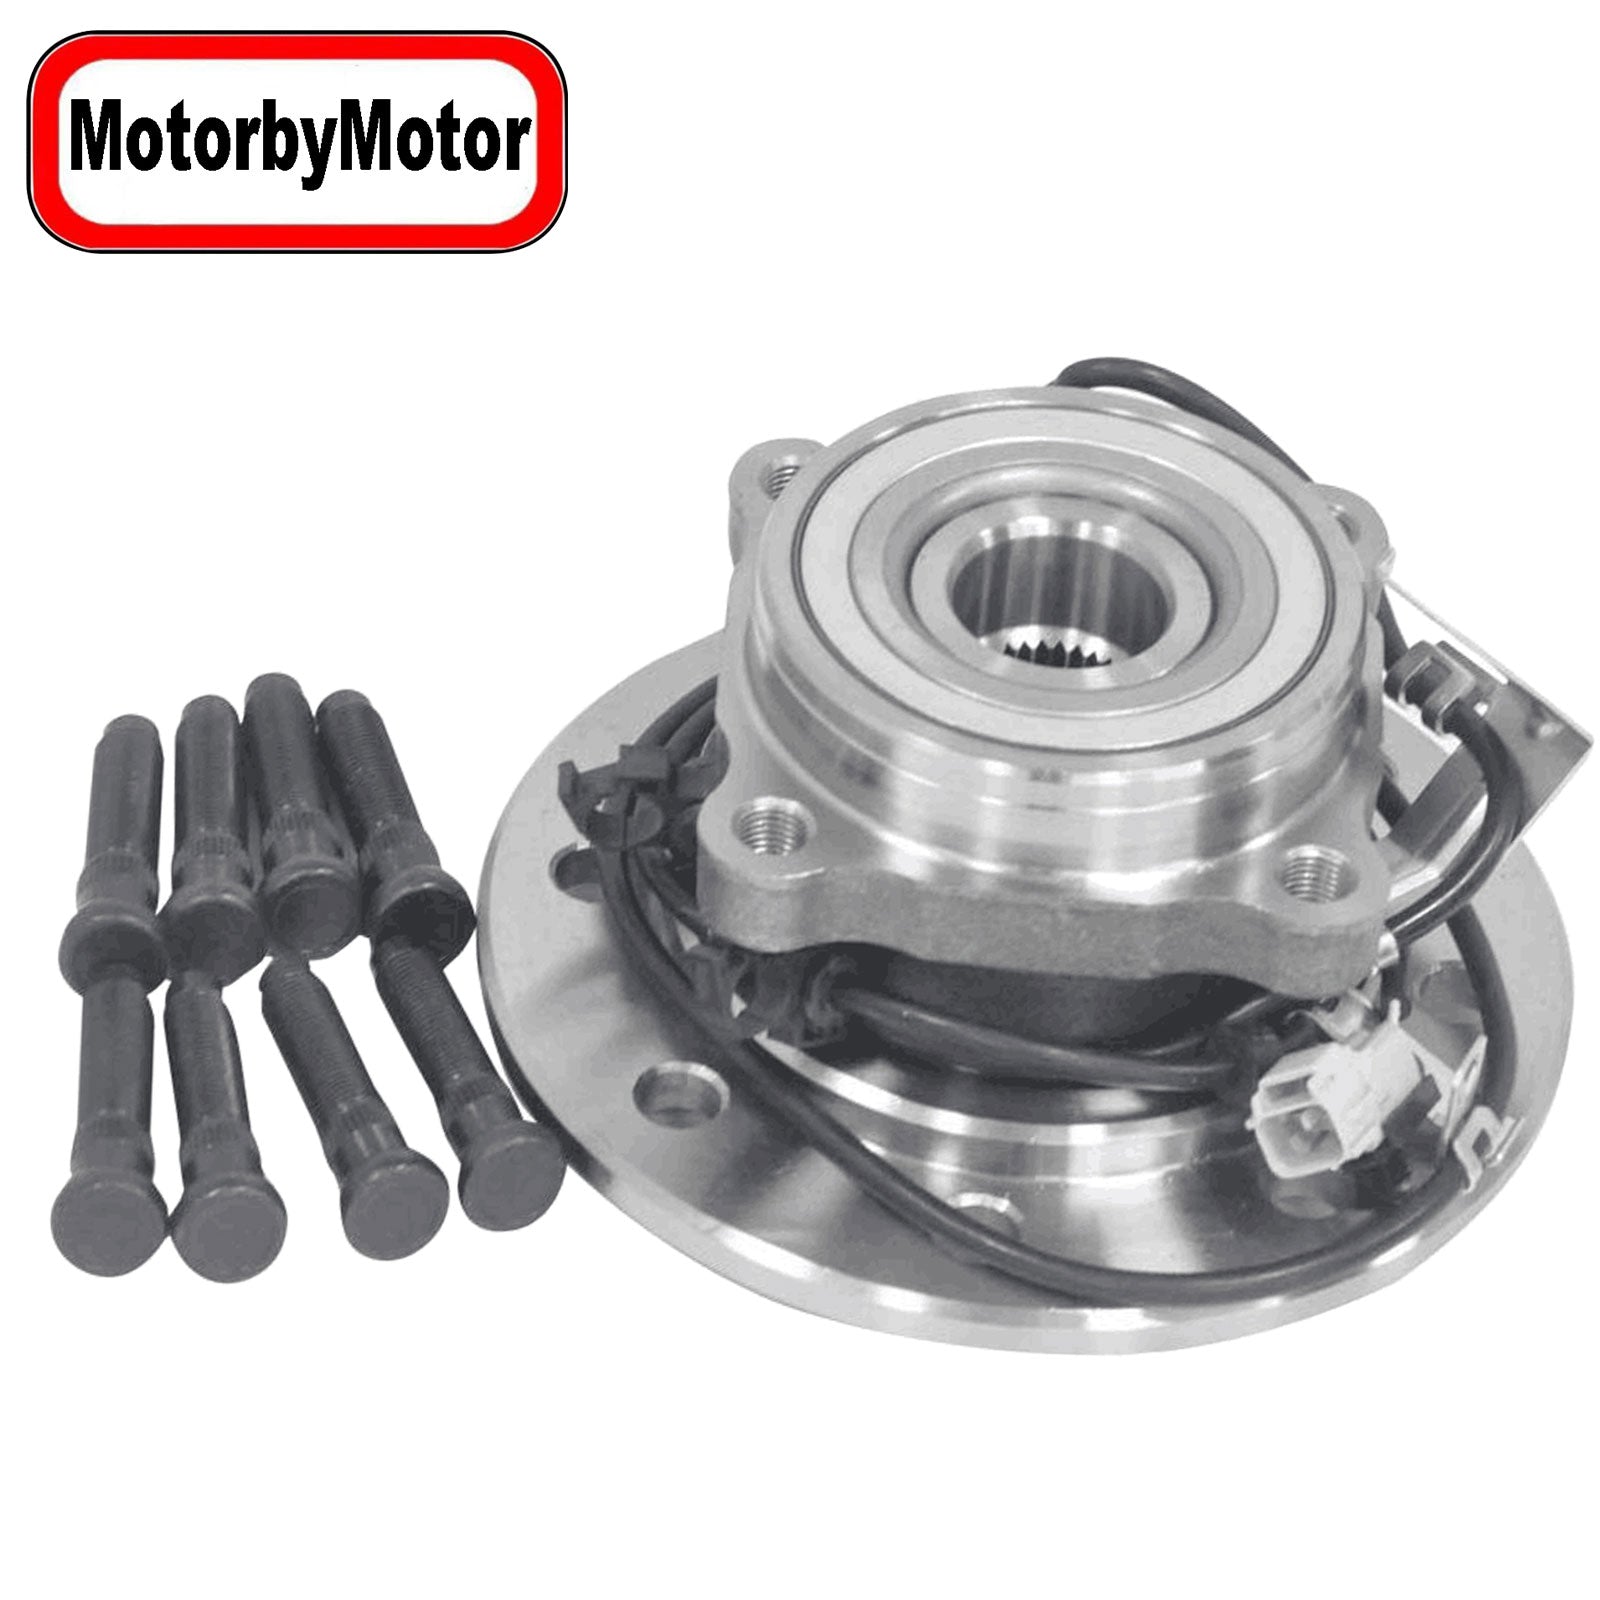 MotorbyMotor 4WD 515069 Front Right Wheel Bearing and Hub Assembly (w/4-Wheel ABS, DRW) with 8 Lugs, 1998 1999 Dodge Ram 3500 -Dual Rear Wheels ONLY-Passenger Side MotorbyMotor